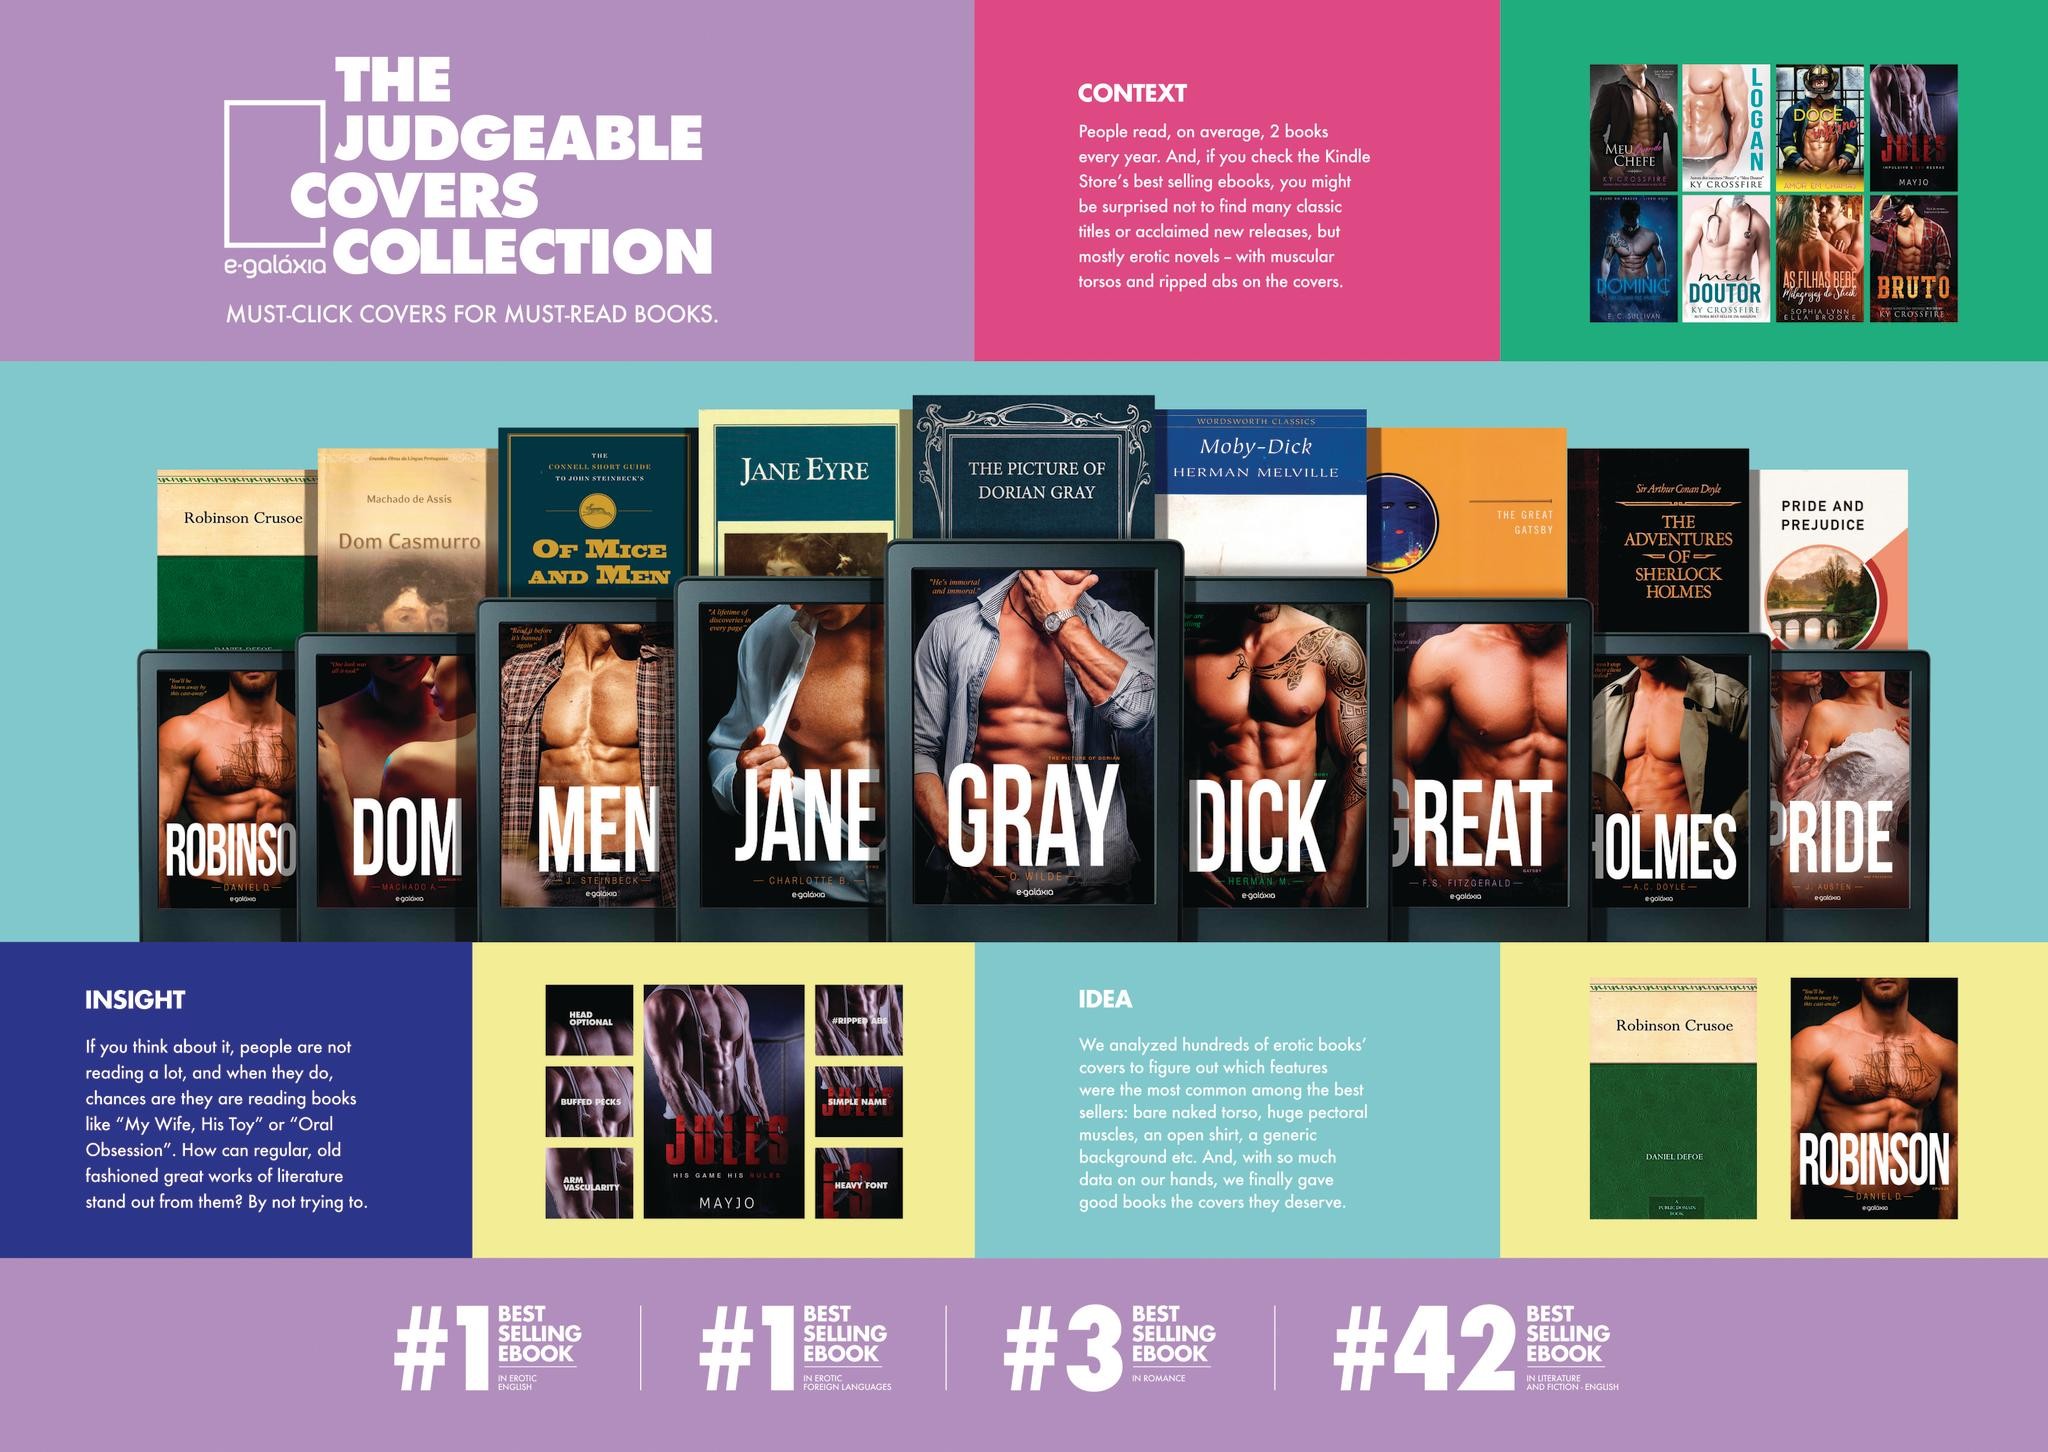 JUDGEABLE COVERS COLLECTION